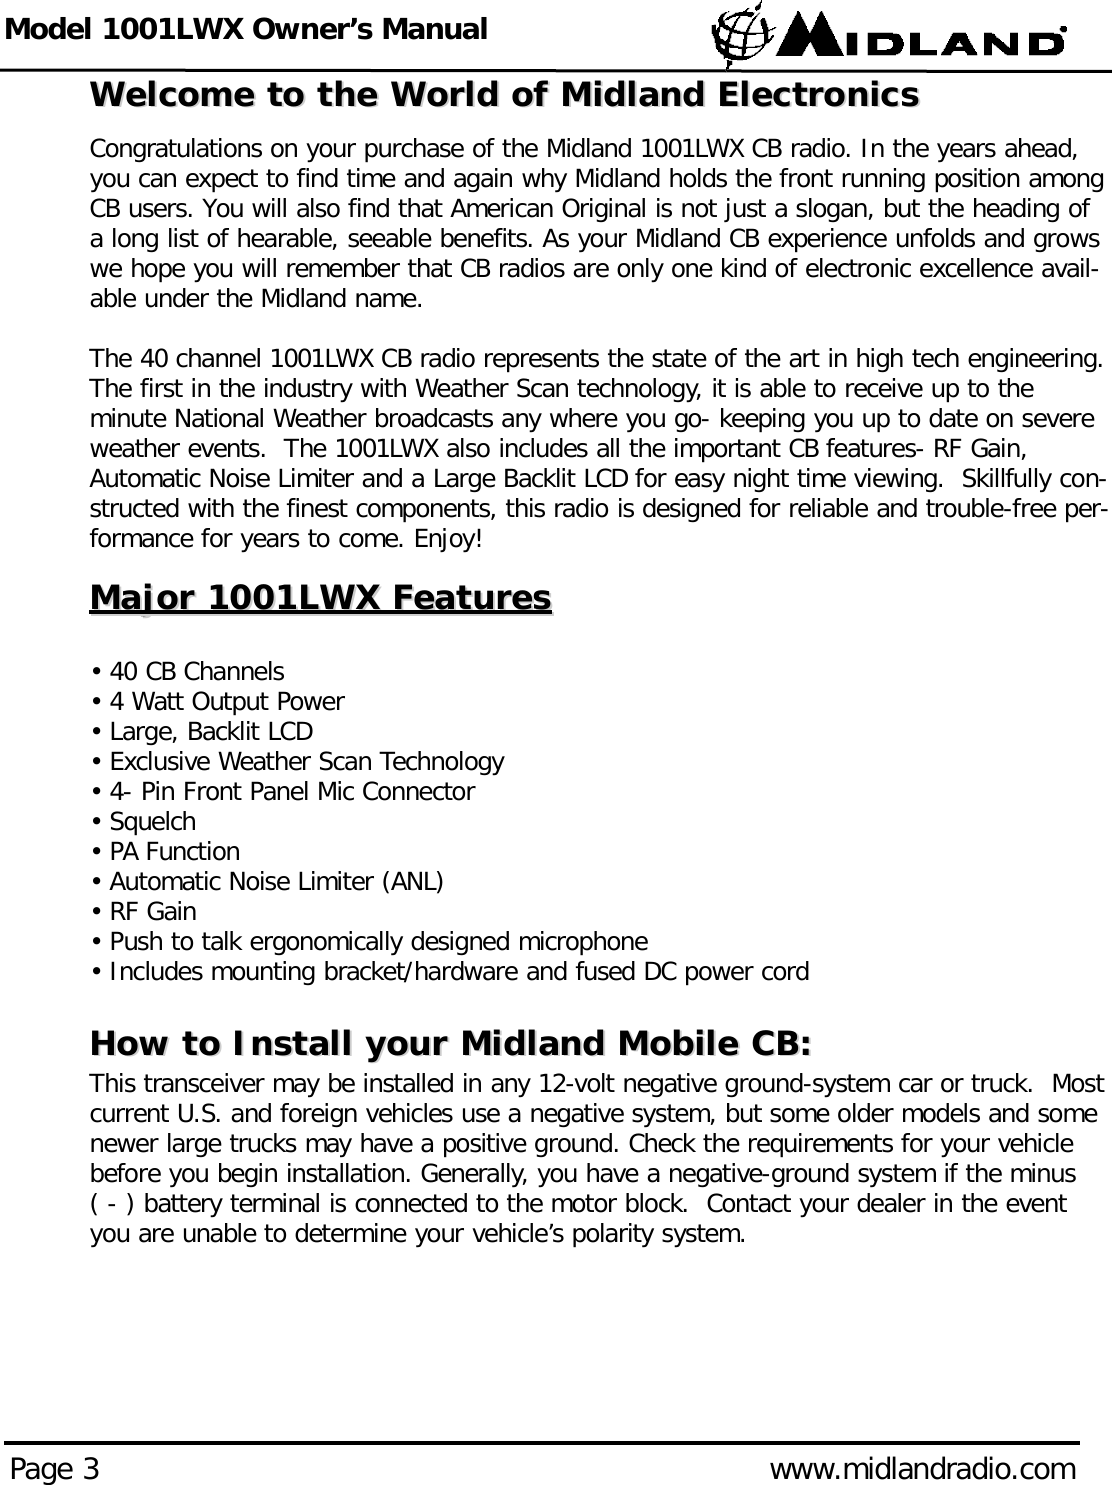 Model 1001LWX Owner’s ManualPage 3 www.midlandradio.comWelcome to the World of Midland ElectronicsWelcome to the World of Midland ElectronicsCongratulations on your purchase of the Midland 1001LWX CB radio. In the years ahead,you can expect to find time and again why Midland holds the front running position amongCB users. You will also find that American Original is not just a slogan, but the heading ofa long list of hearable, seeable benefits. As your Midland CB experience unfolds and growswe hope you will remember that CB radios are only one kind of electronic excellence avail-able under the Midland name.The 40 channel 1001LWX CB radio represents the state of the art in high tech engineering.The first in the industry with Weather Scan technology, it is able to receive up to theminute National Weather broadcasts any where you go- keeping you up to date on severeweather events.  The 1001LWX also includes all the important CB features- RF Gain,Automatic Noise Limiter and a Large Backlit LCD for easy night time viewing.  Skillfully con-structed with the finest components, this radio is designed for reliable and trouble-free per-formance for years to come. Enjoy!Major 1001LWX FeaturesMajor 1001LWX Features• 40 CB Channels• 4 Watt Output Power• Large, Backlit LCD• Exclusive Weather Scan Technology• 4- Pin Front Panel Mic Connector • Squelch• PA Function • Automatic Noise Limiter (ANL)• RF Gain• Push to talk ergonomically designed microphone• Includes mounting bracket/hardware and fused DC power cord How to Install your Midland Mobile CB:How to Install your Midland Mobile CB:This transceiver may be installed in any 12-volt negative ground-system car or truck.  Mostcurrent U.S. and foreign vehicles use a negative system, but some older models and somenewer large trucks may have a positive ground. Check the requirements for your vehiclebefore you begin installation. Generally, you have a negative-ground system if the minus ( - ) battery terminal is connected to the motor block.  Contact your dealer in the eventyou are unable to determine your vehicle’s polarity system.